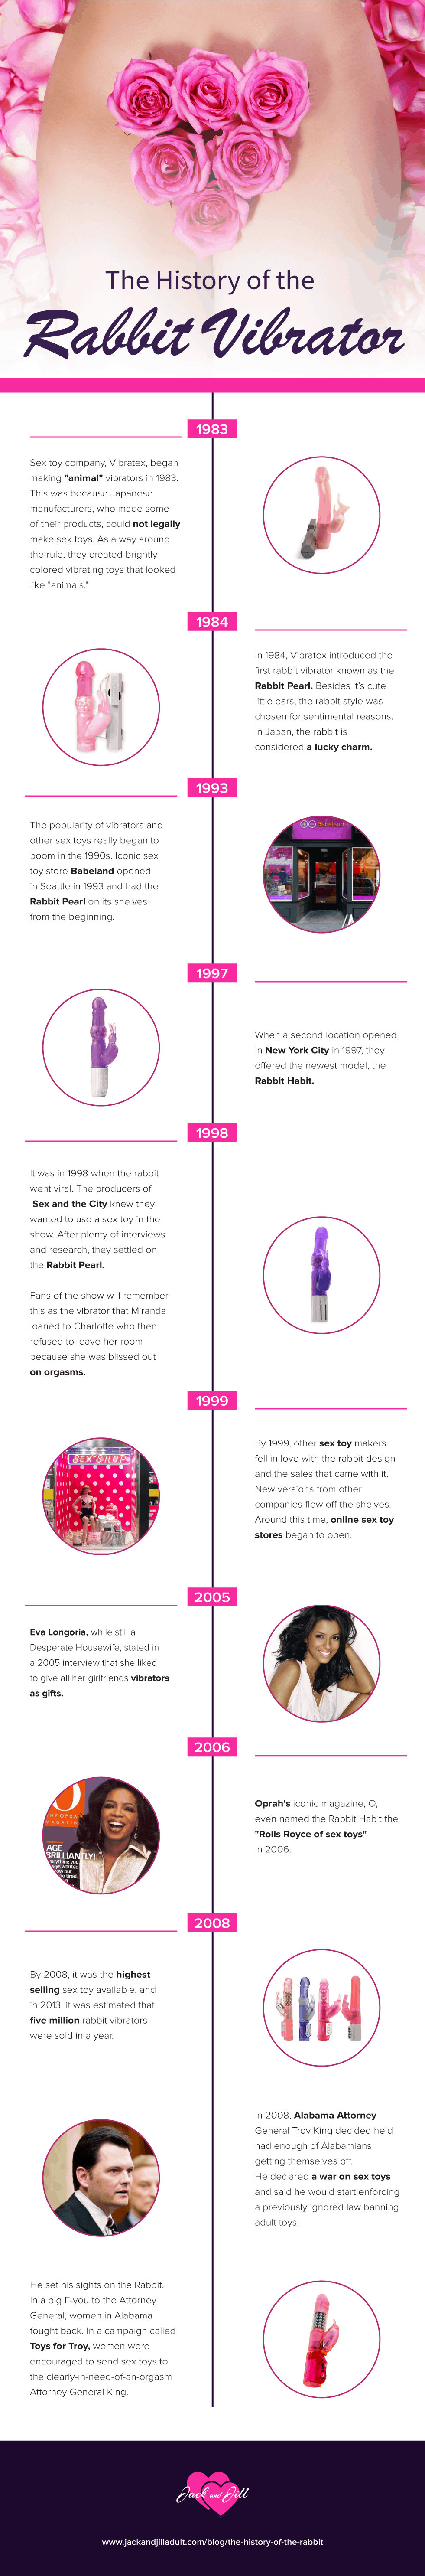 Infographic for The History of the Rabbit Vibrator